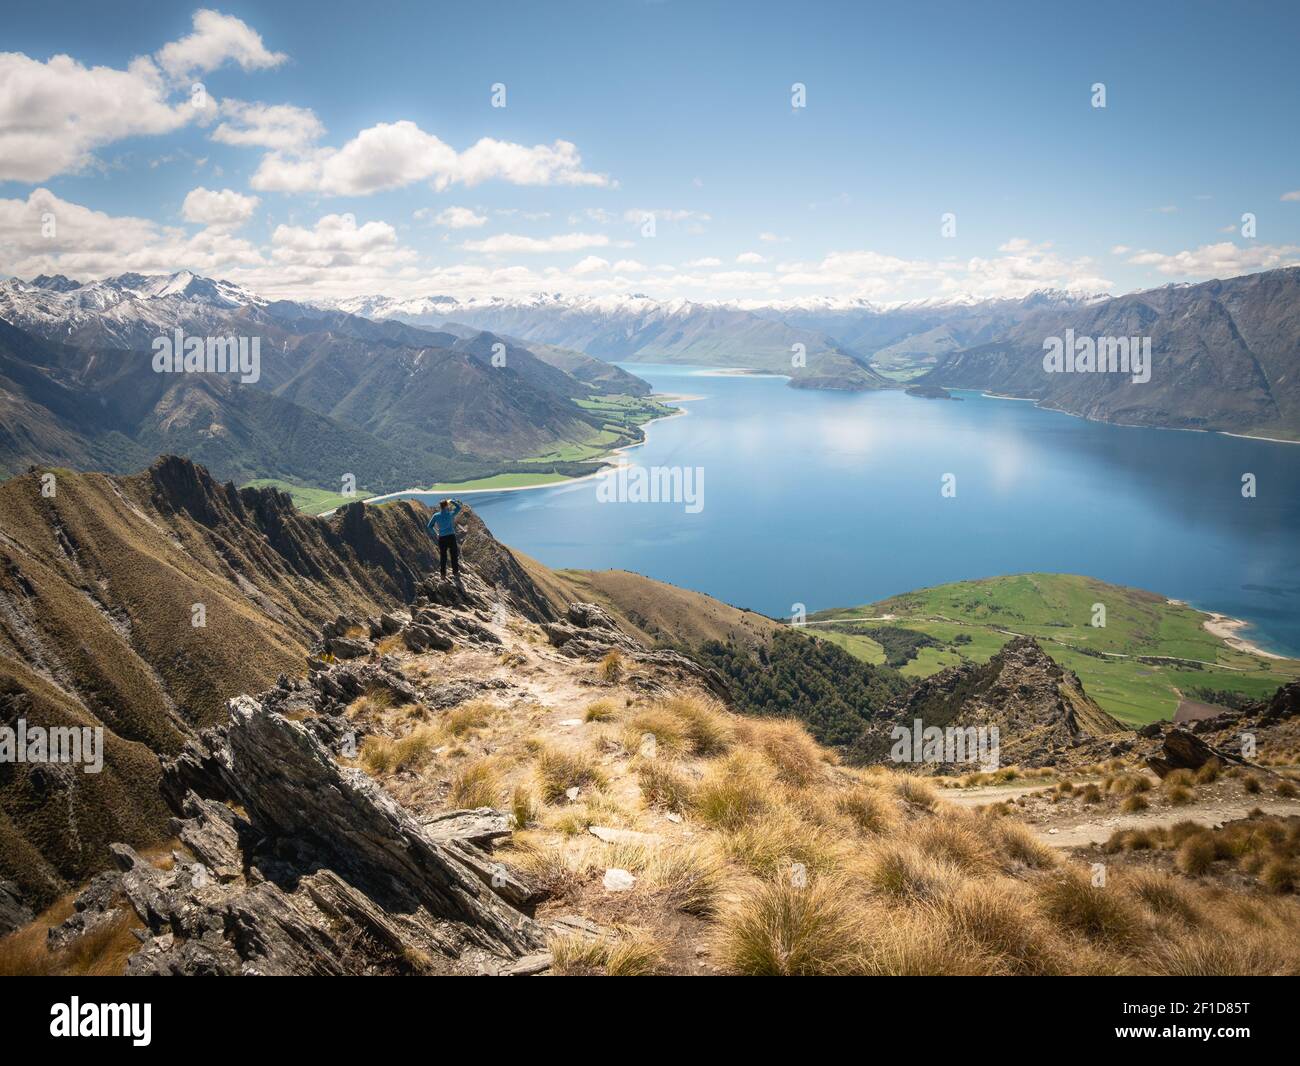 Man standing on the edge of rock enjoying beautiful vista with lush green meadows, blue lake and snowy mountains, sunny day on Isthmus Peak summit Stock Photo